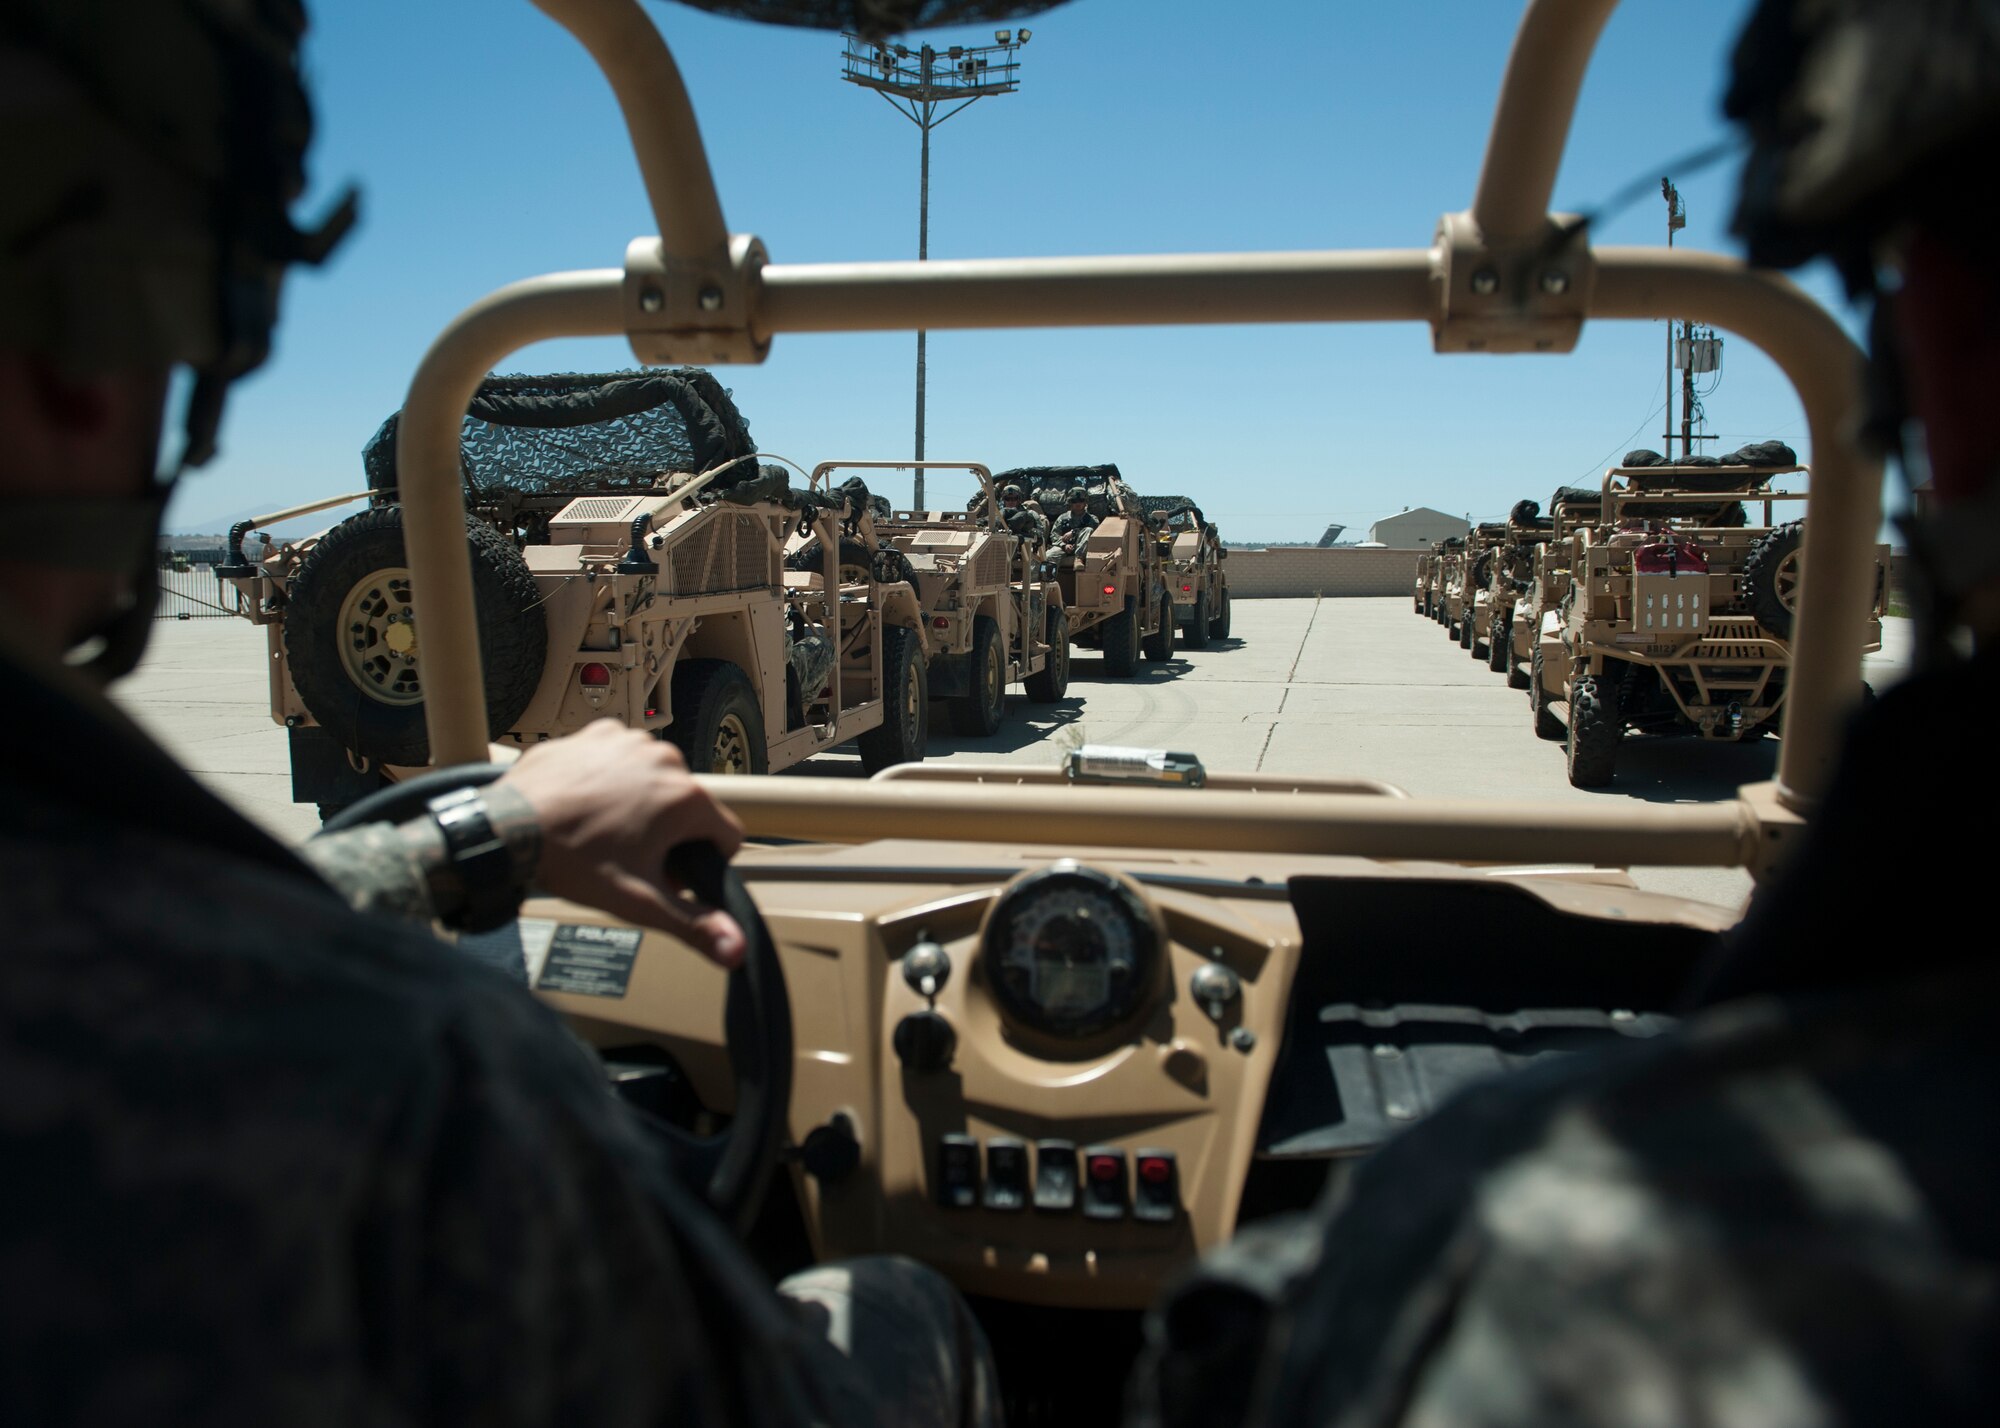 Troops from the Army’s 2nd Brigade Combat Team, 82nd Airborne Division prepare to load militarized all-terrain vehicles onto Air Force C-130’s and C-17’s Aug. 4, 2015, at March Air Reserve Base, Calif. Twenty aircraft including C-130’s and C-17’s were used to drop more than 615 paratroopers and deliver Army assets such as 28 militarized all-terrain vehicles, 18 armored vehicles and two M142 high mobility artillery rocket systems during Operation Dragon Spear. (U.S. Air Force photo by Senior Airman Scott Poe)